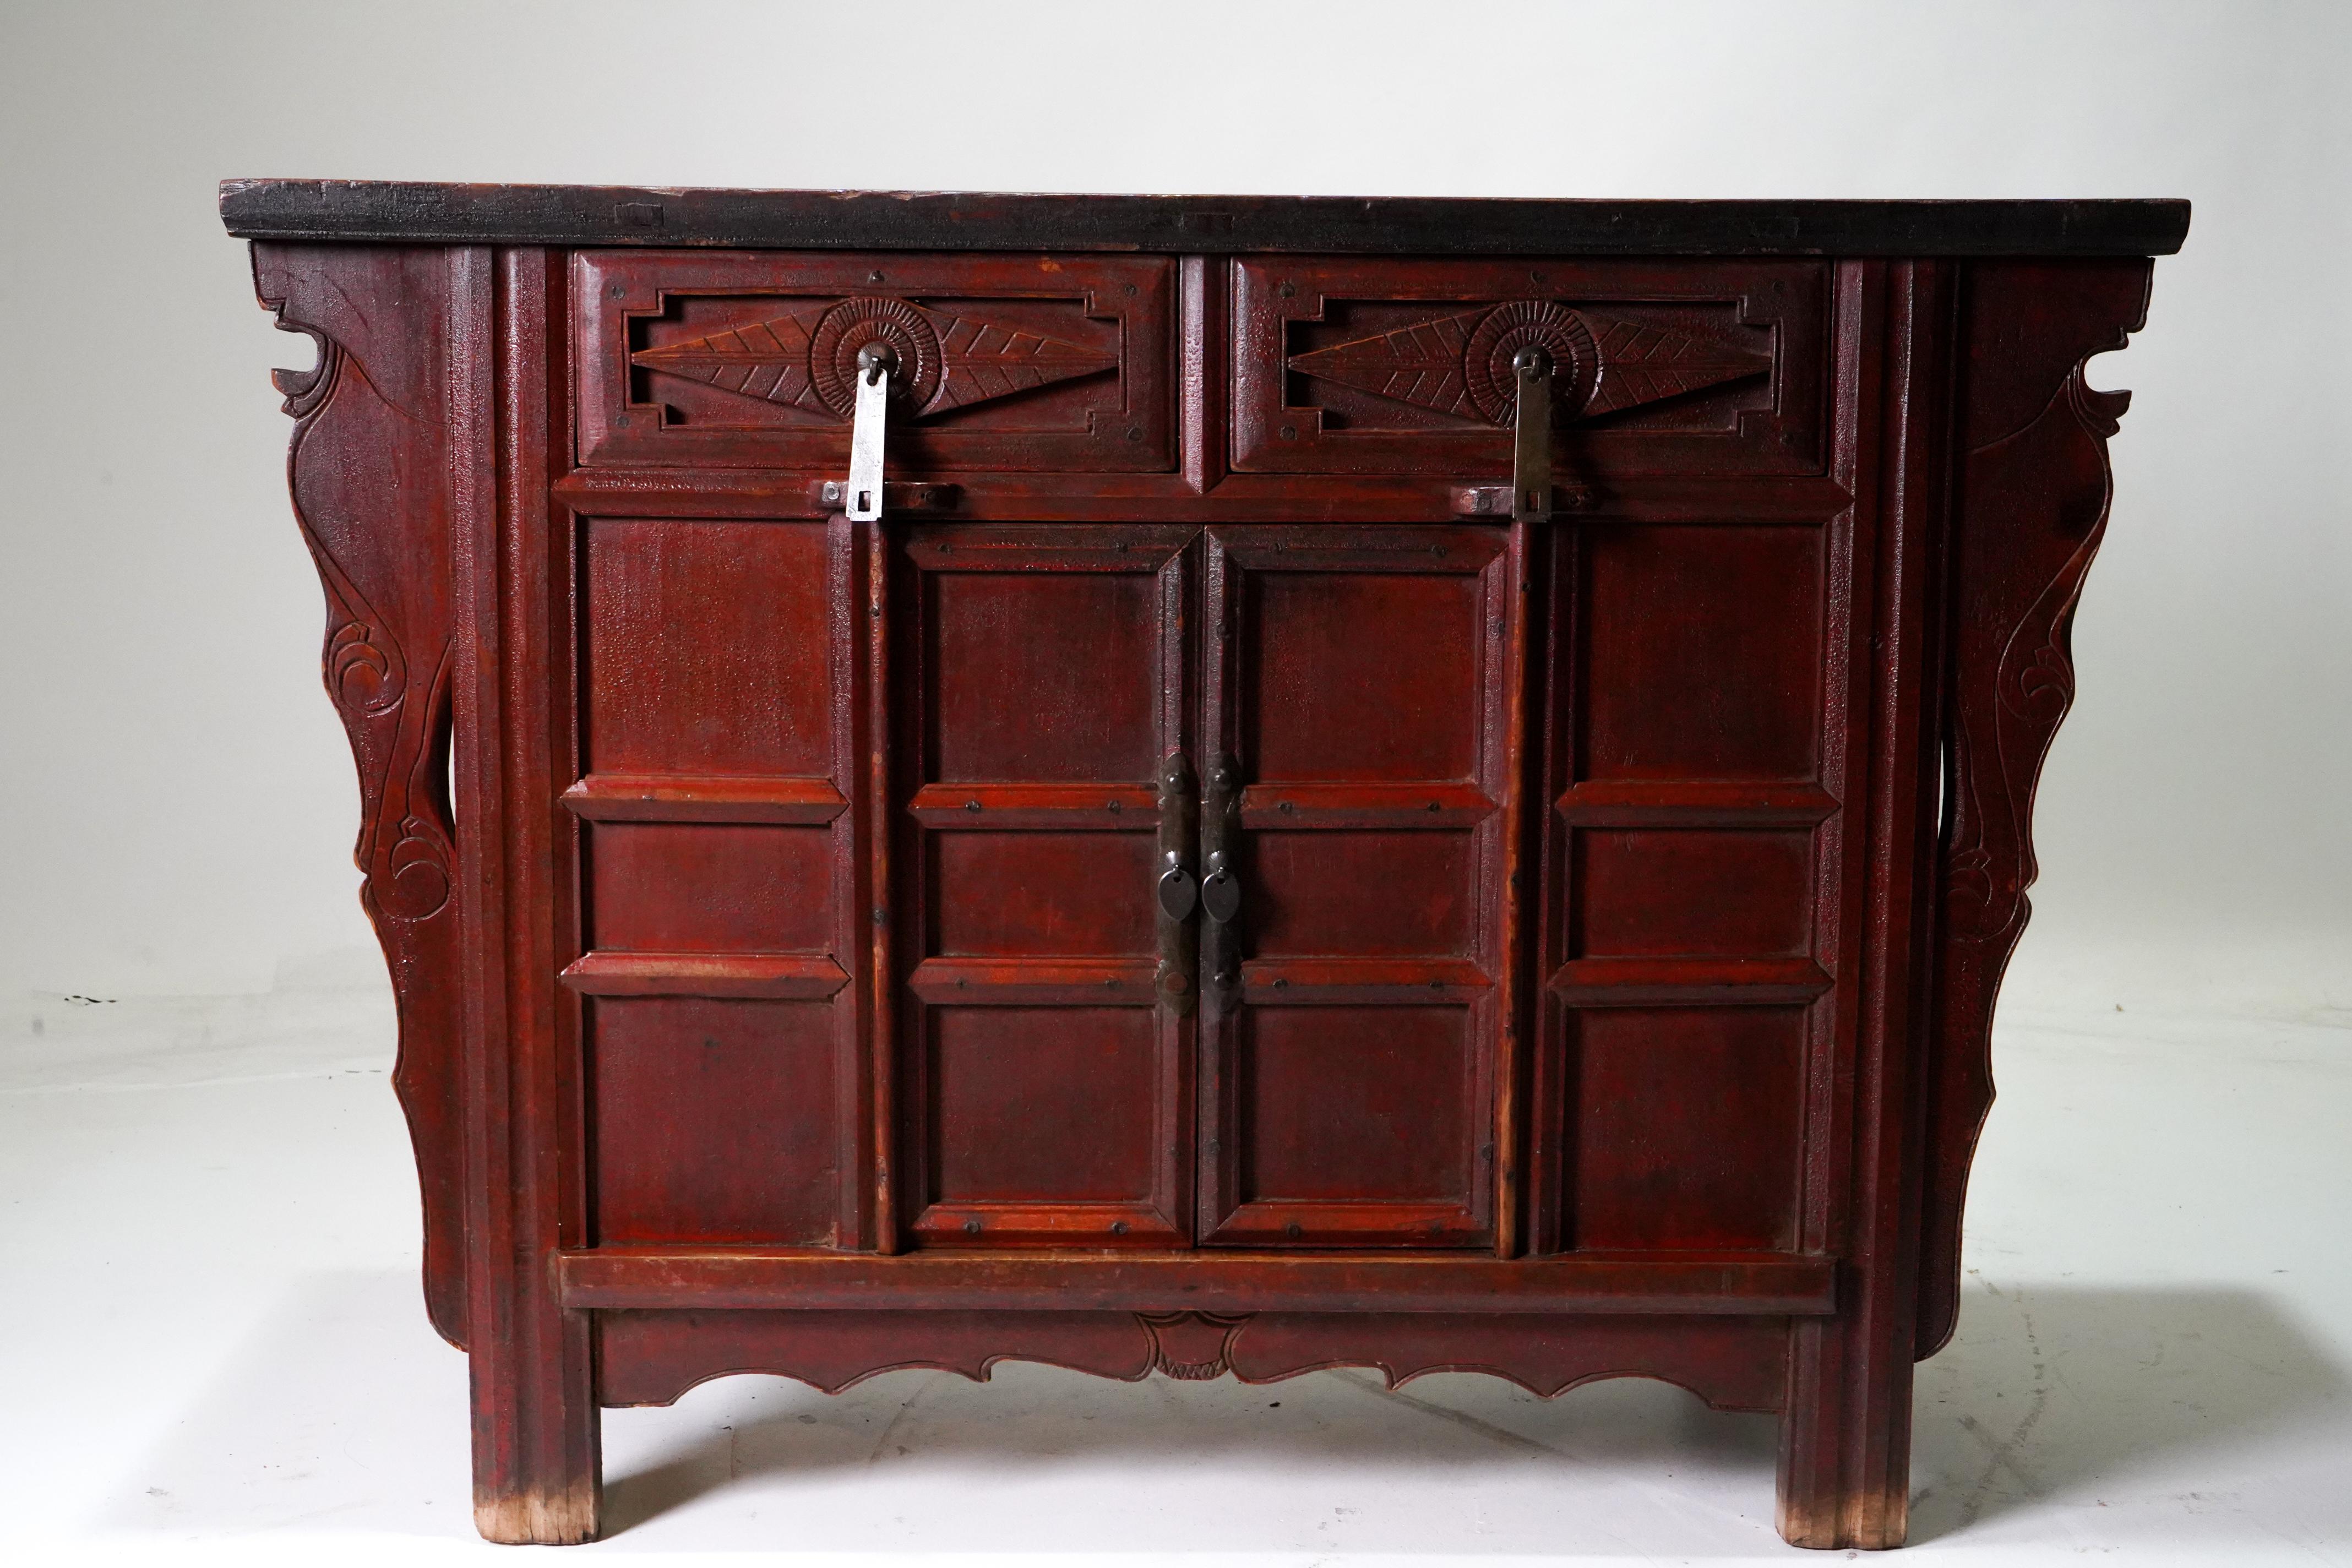 A Chinese Late Qing wooden storage chest from the 19th century, with carved spandrels, drawers, doors and finished in oxblood and cinnabar lacquer. This elegant coffer, sometimes called a butterfly cabinet, features a rectangular floating panel top